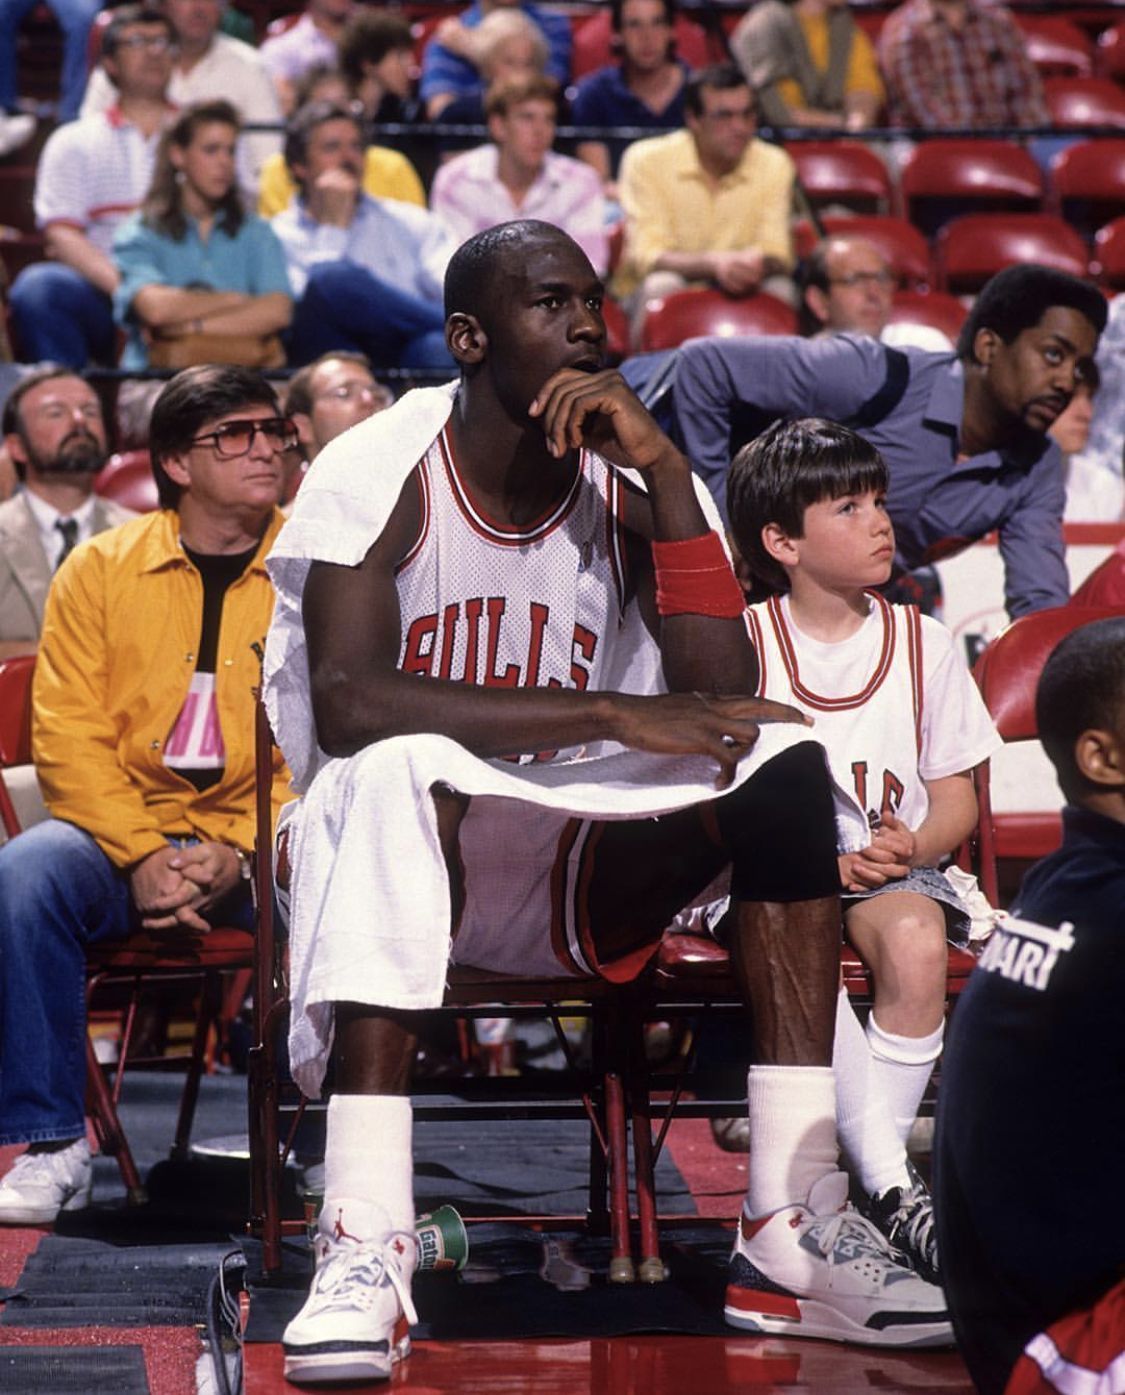 Michael Jordan sits on the bench with a young fan during a Bulls game. - Michael Jordan